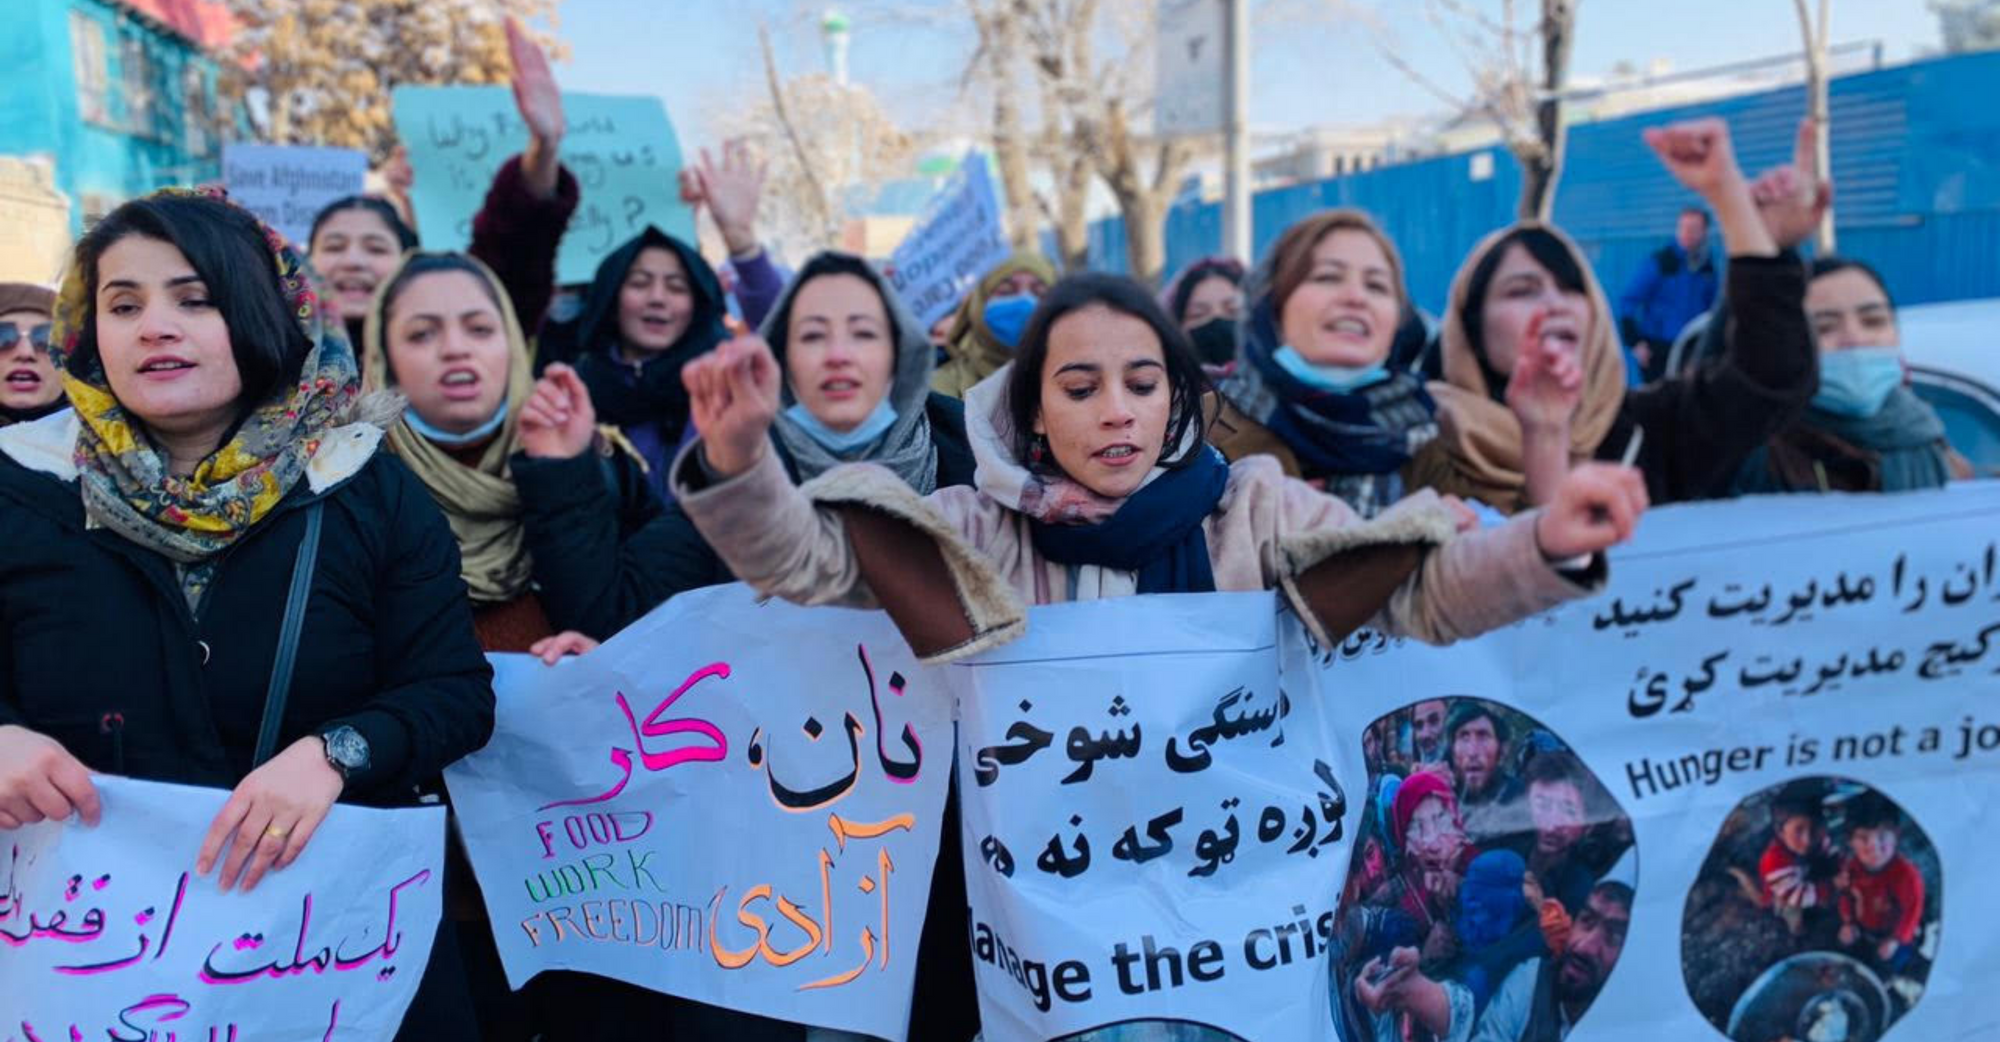 Meet the Women Leading the Resistance in Afghanistan